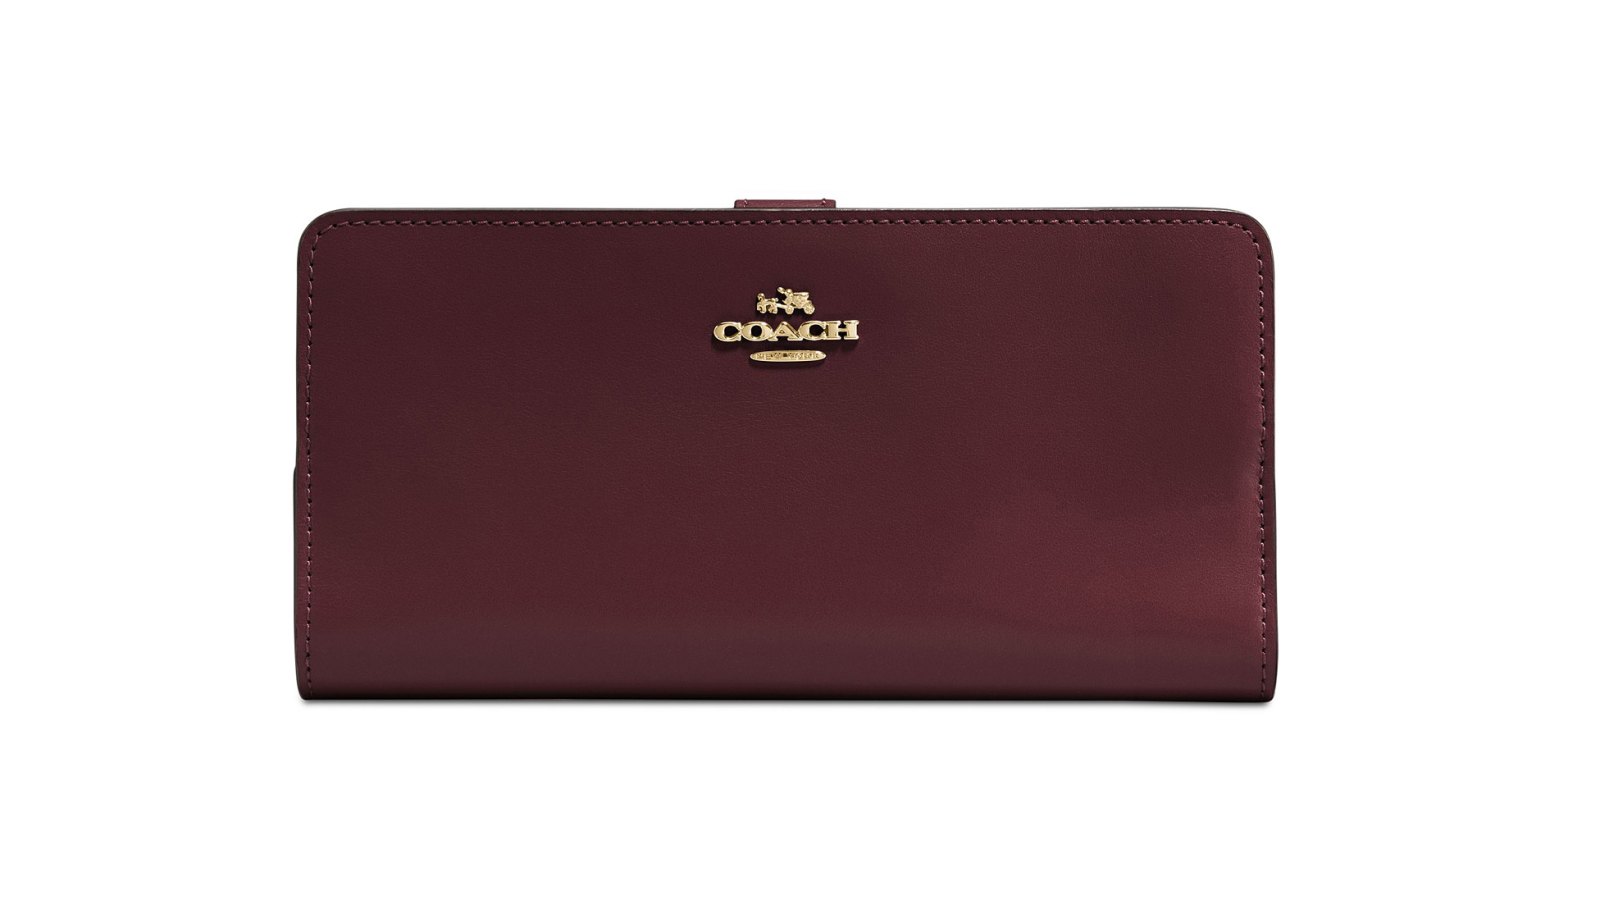 Coach Skinny Wallet in Refined Leather (Oxblood/Gold)